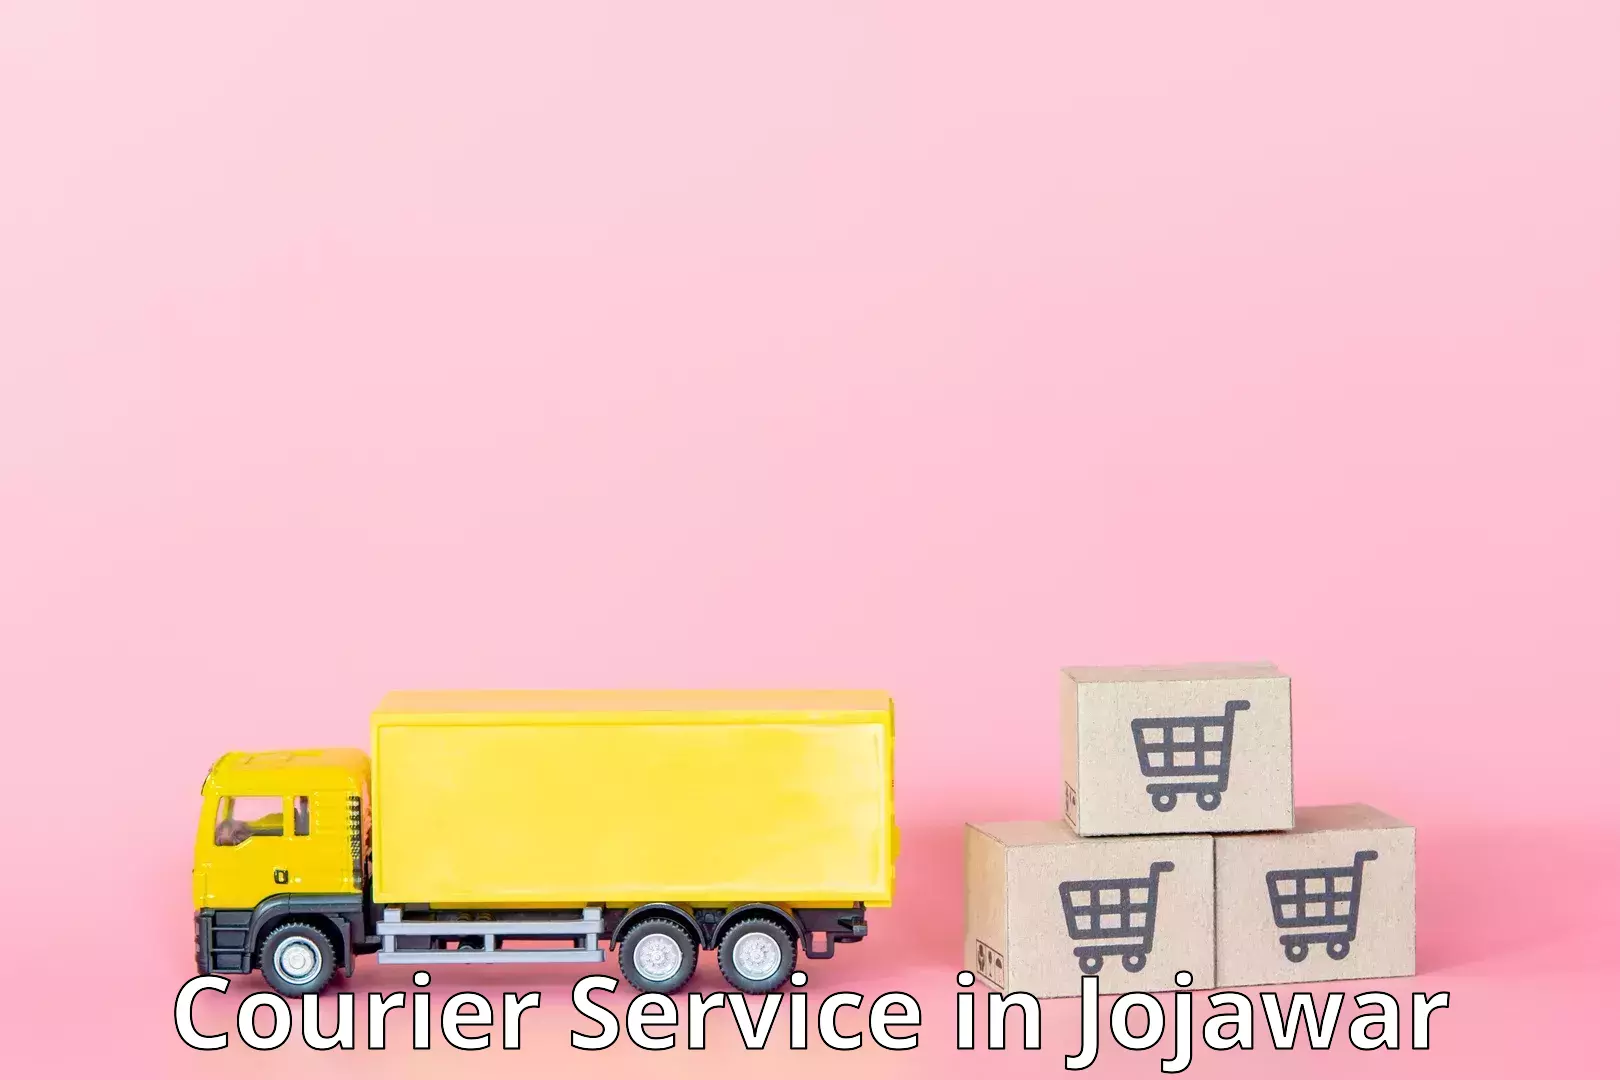 Tailored delivery services in Jojawar